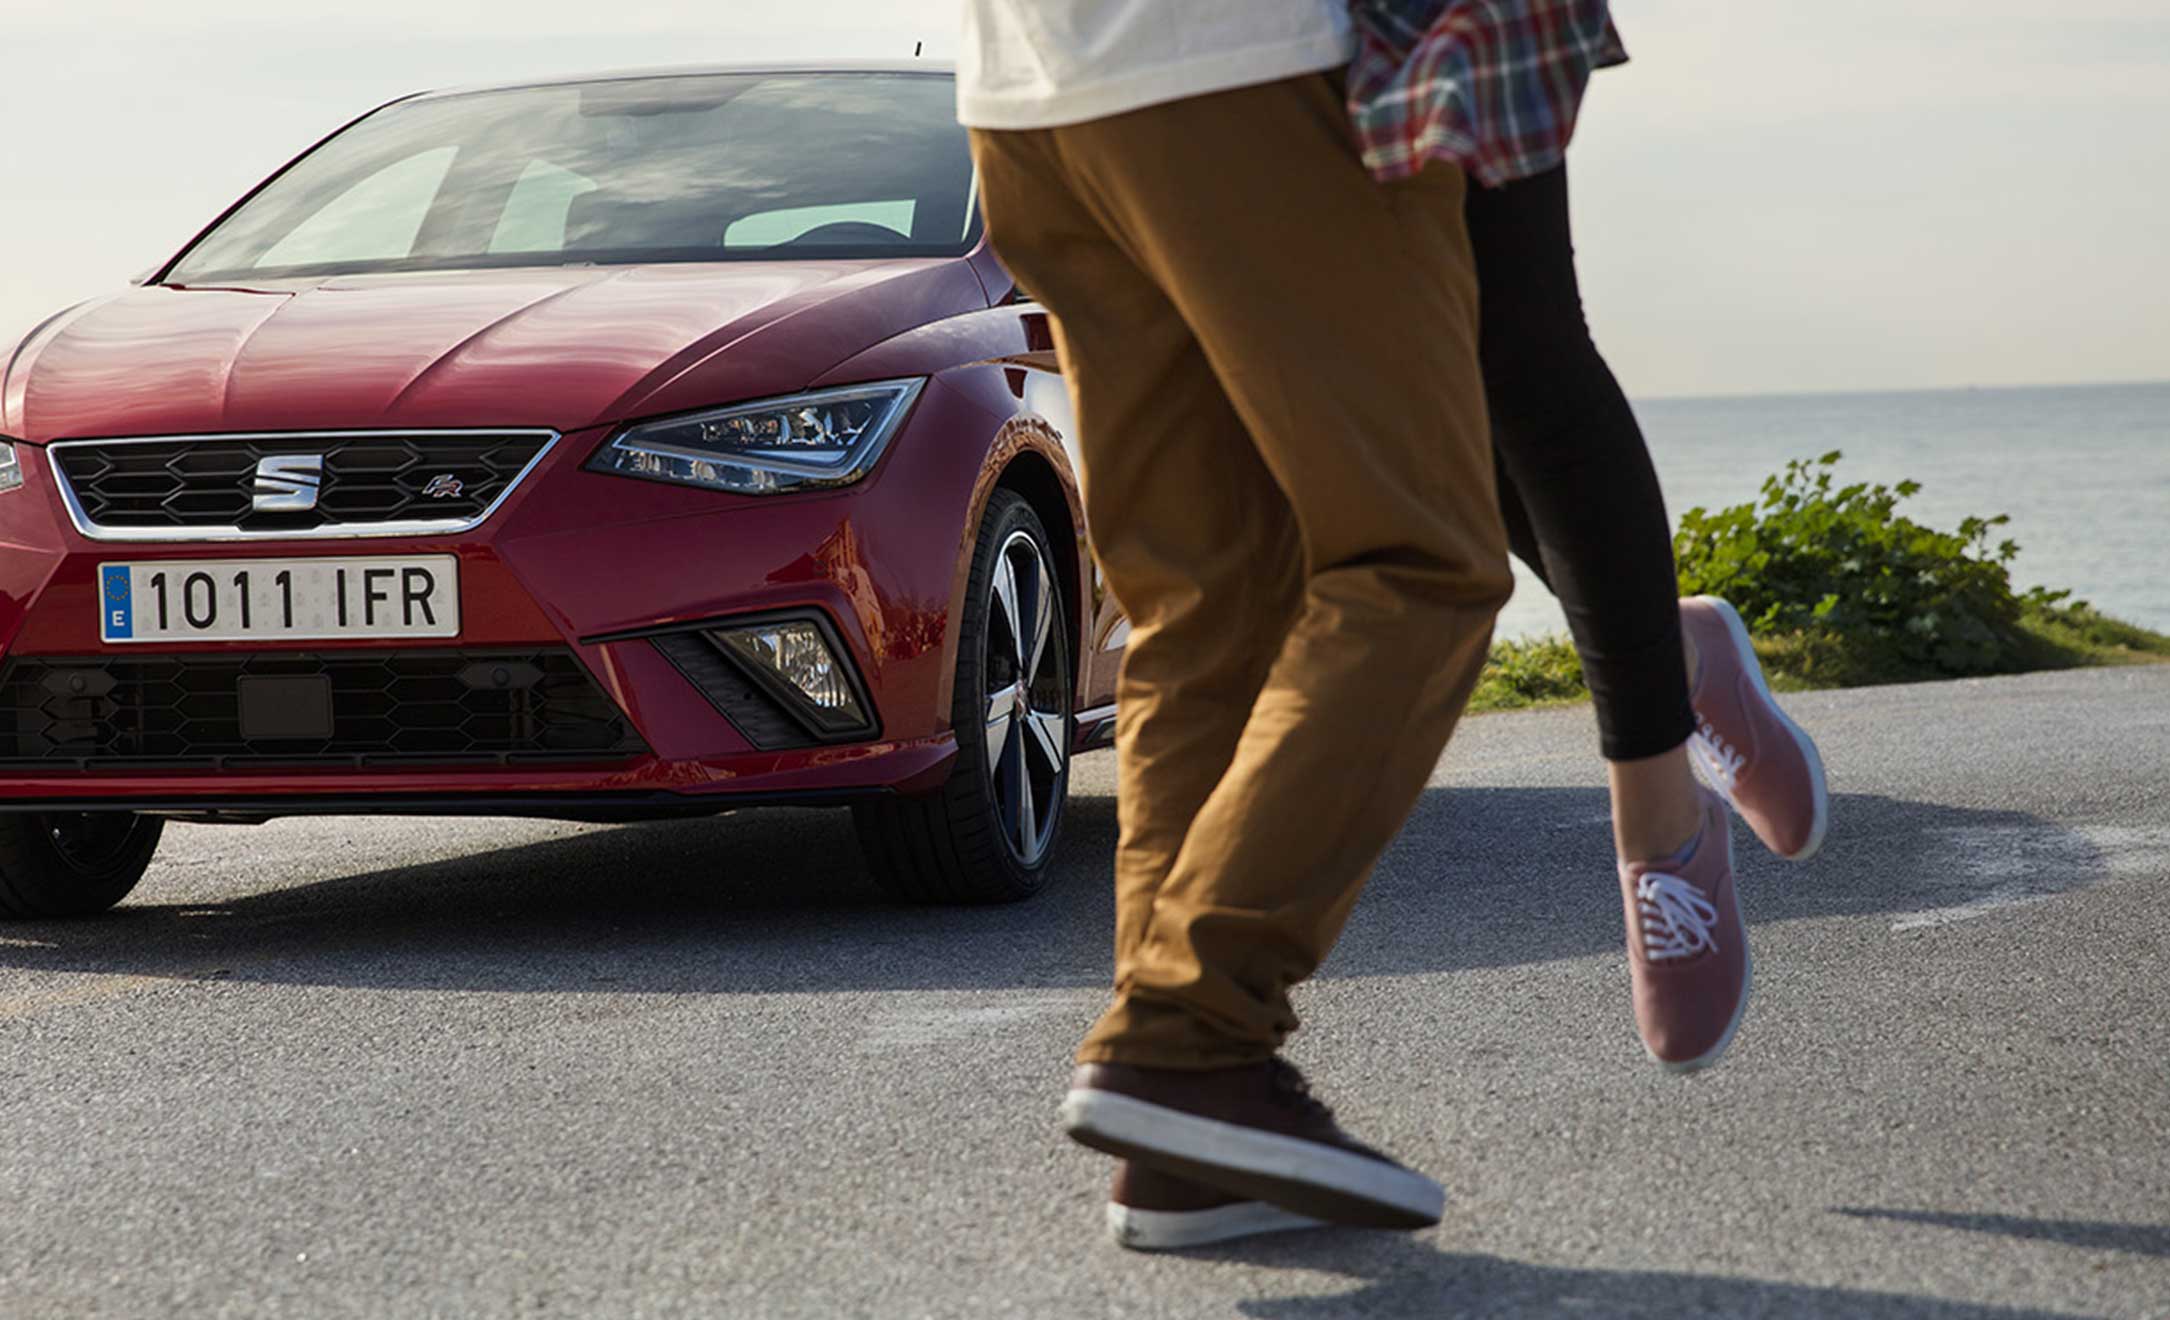 SEAT Ibiza safety feature will automatically call emergency services if an accident occurs